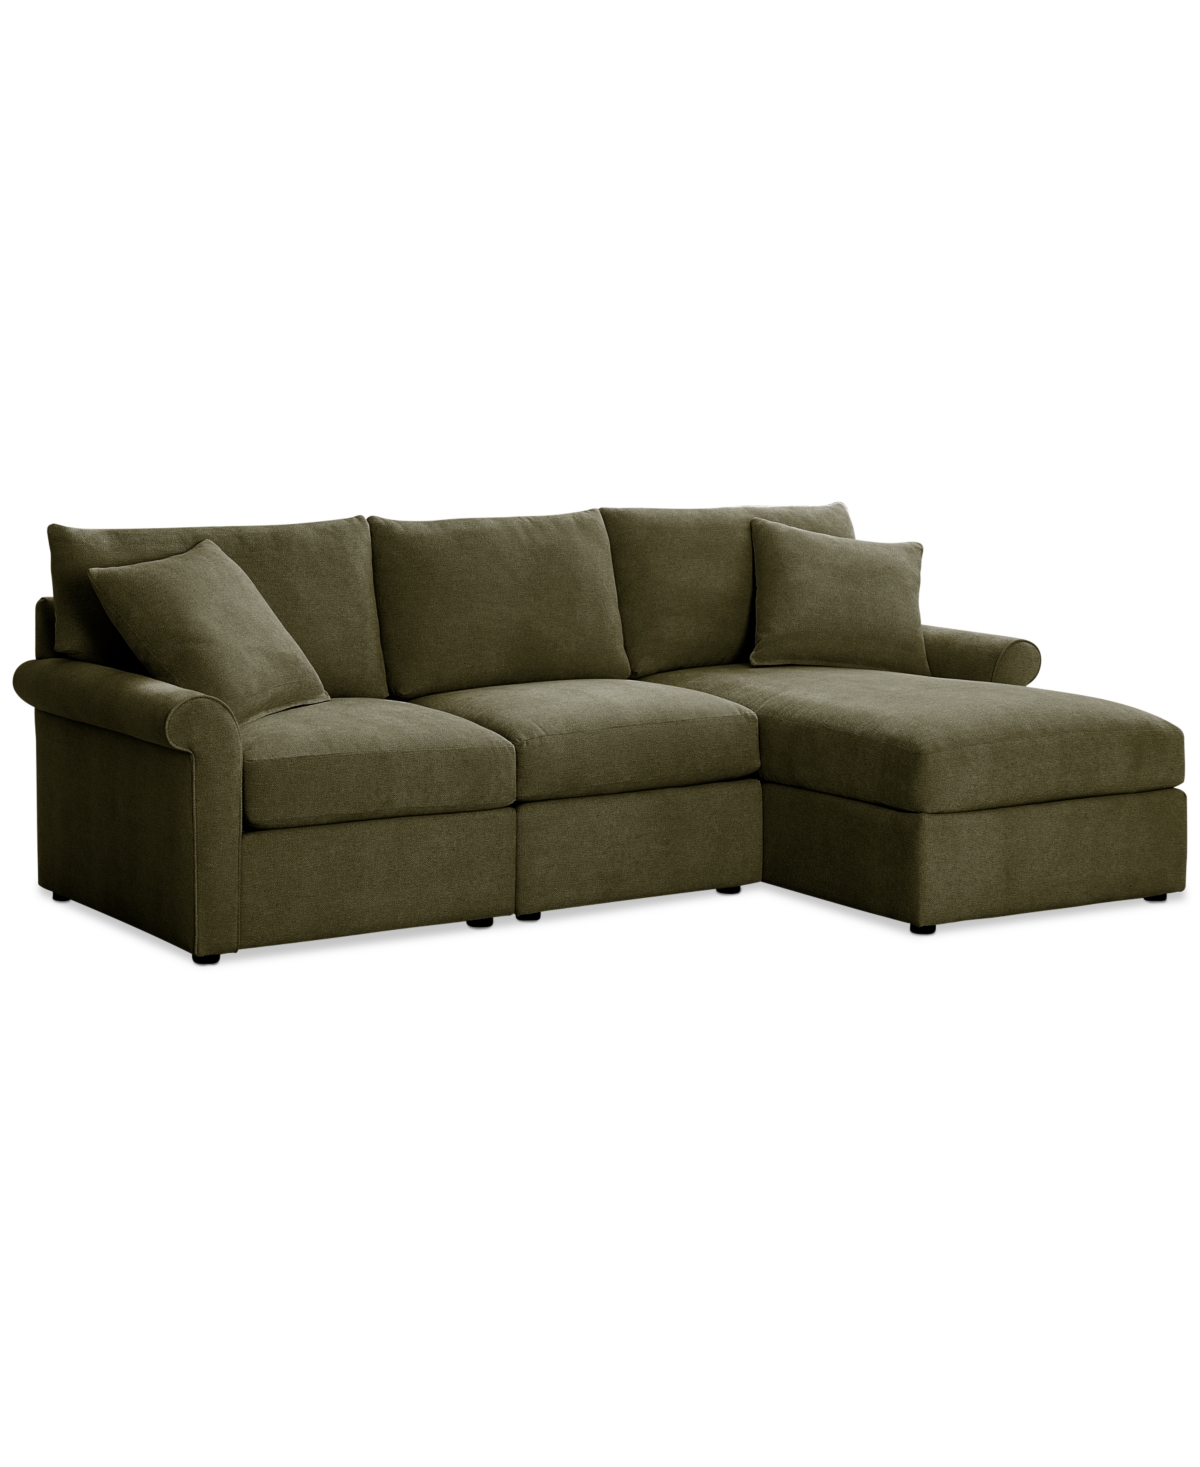 Furniture Wrenley 99" 3-pc. Fabric Modular Chaise Sectional Sofa, Created For Macy's In Olive